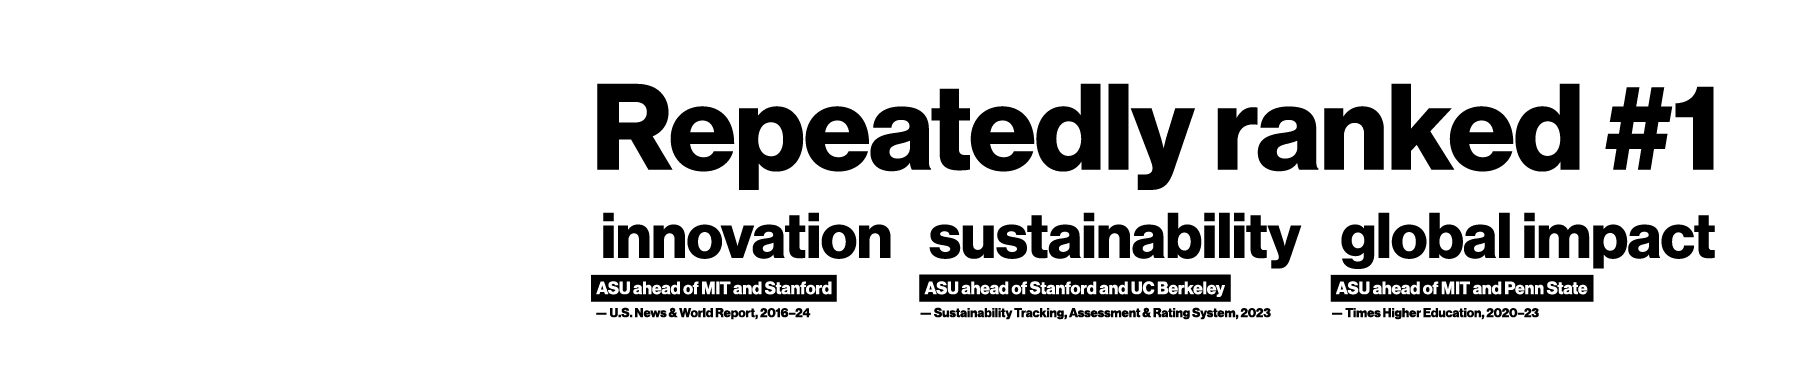 Repeatedly ranked #1 in innovation (ASU ahead of MIT and Stanford), sustainability (ASU ahead of Stanford and UC Berkeley), and global impact (ASU ahead of MIT and Penn State)